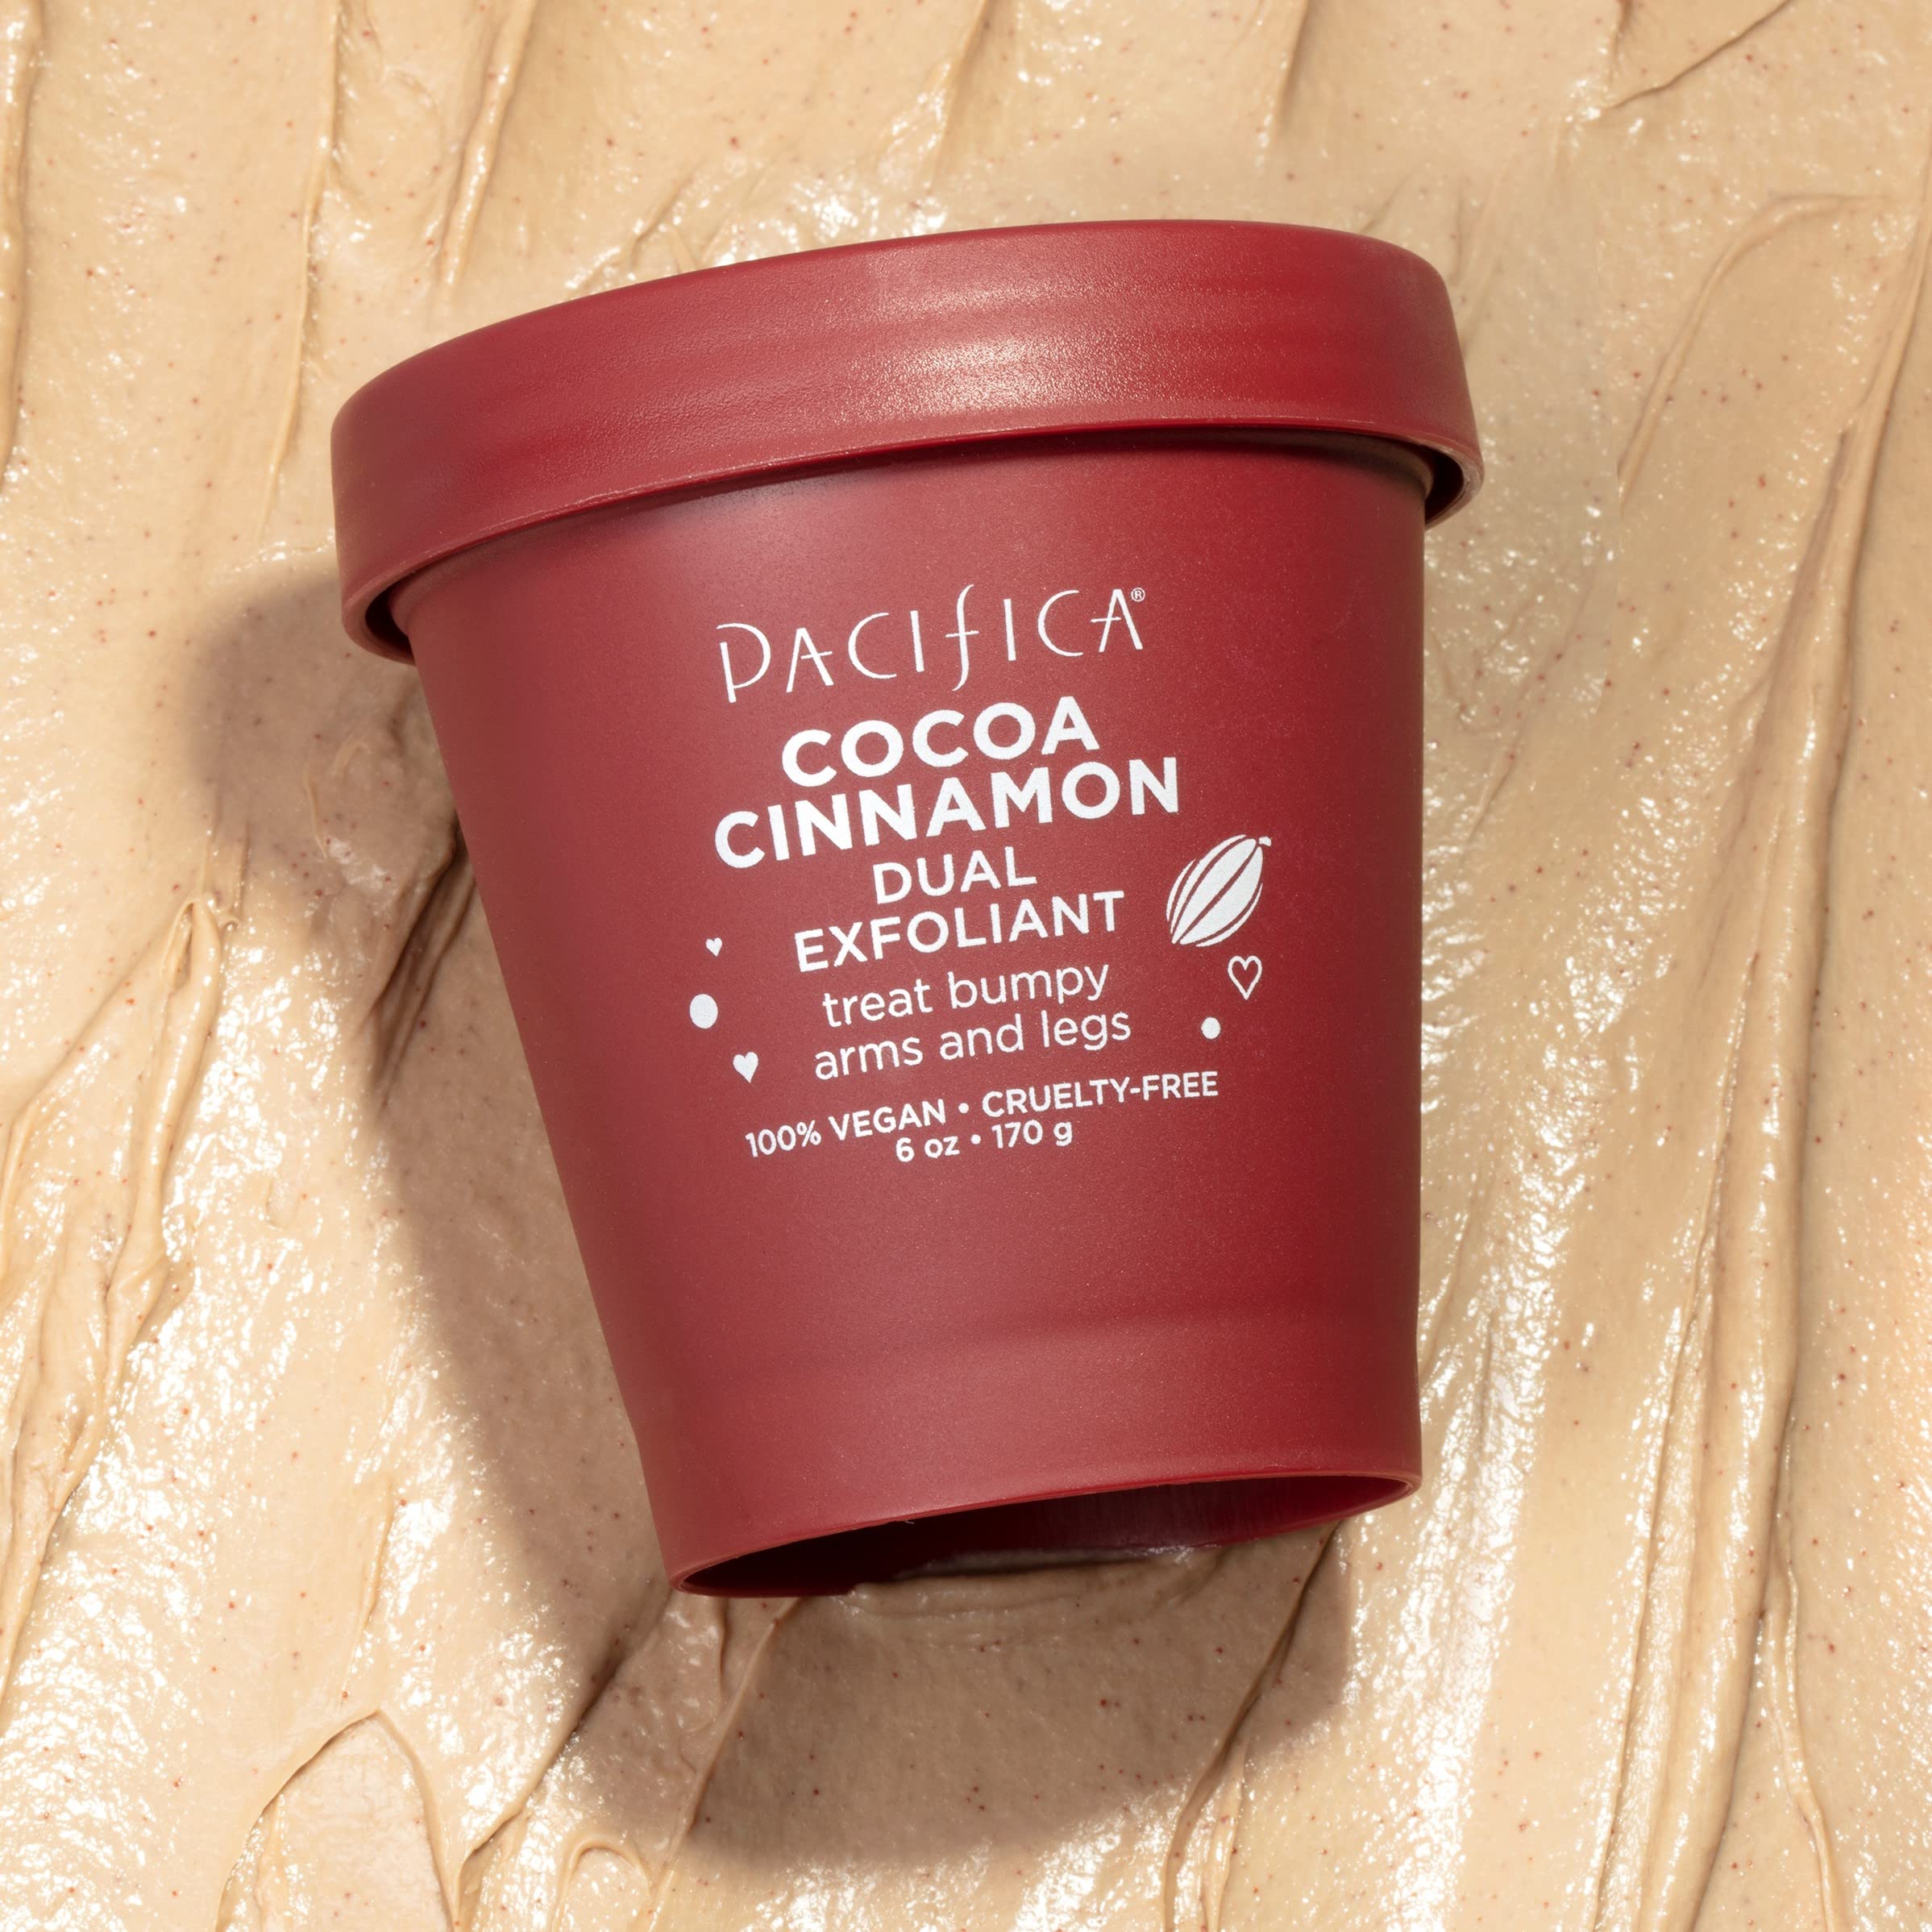 Pacifica Beauty, Cocoa Cinnamon Exfoliating Body Scrub, Cocoa Seed Butter, Chocolate, Leaves Skin Soft and Hydrated, Gentle Exfoliant for All Skin Types, Vegan + Cruelty Free, Chocolate, 6 Oz